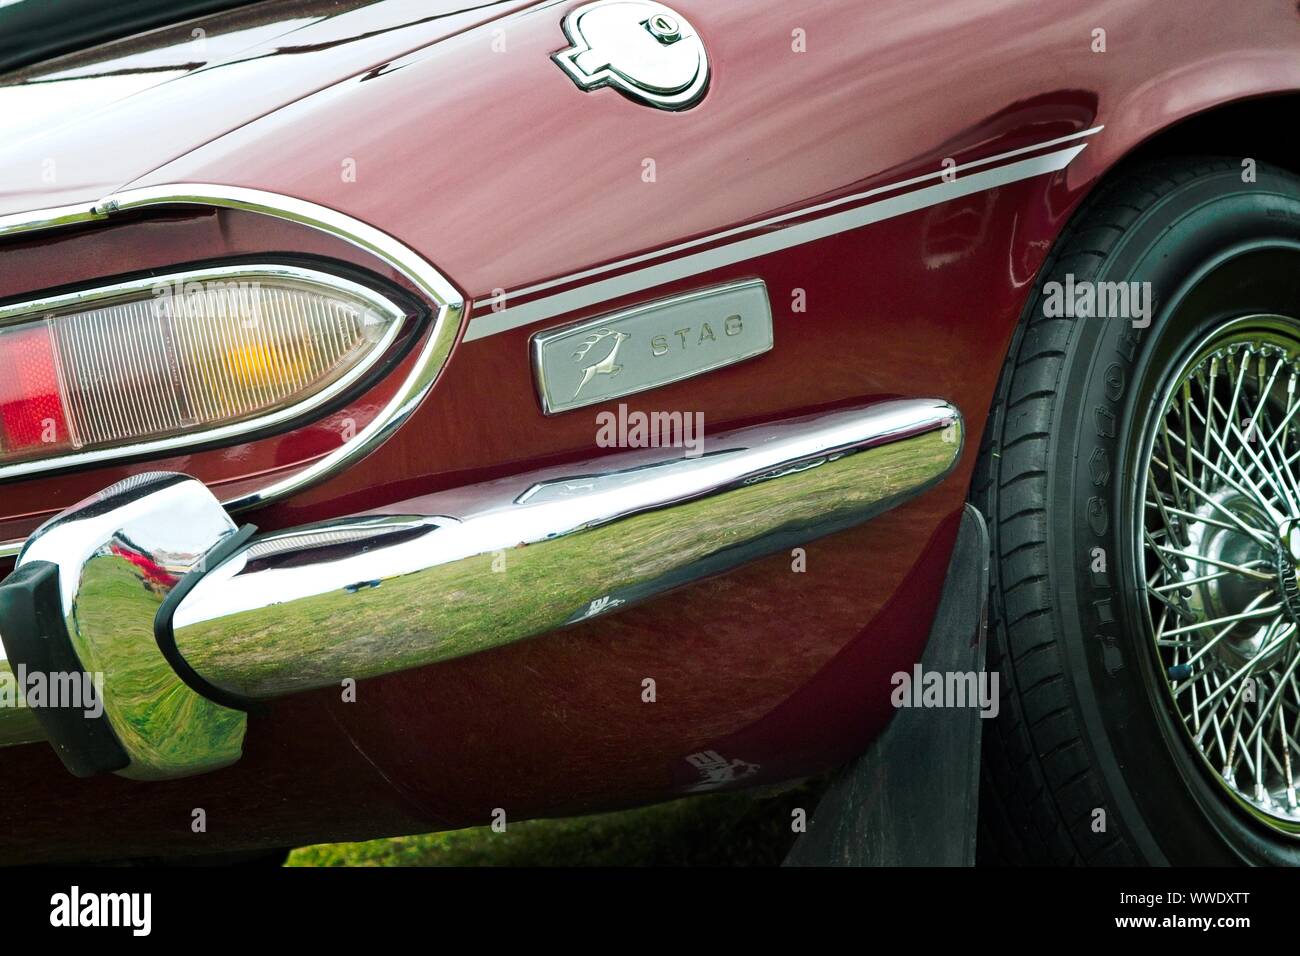 Right side rear quarter detail of a Triumph Stag classic British sports car showing chrome bumper, light cluster and Stag badge. Stock Photo